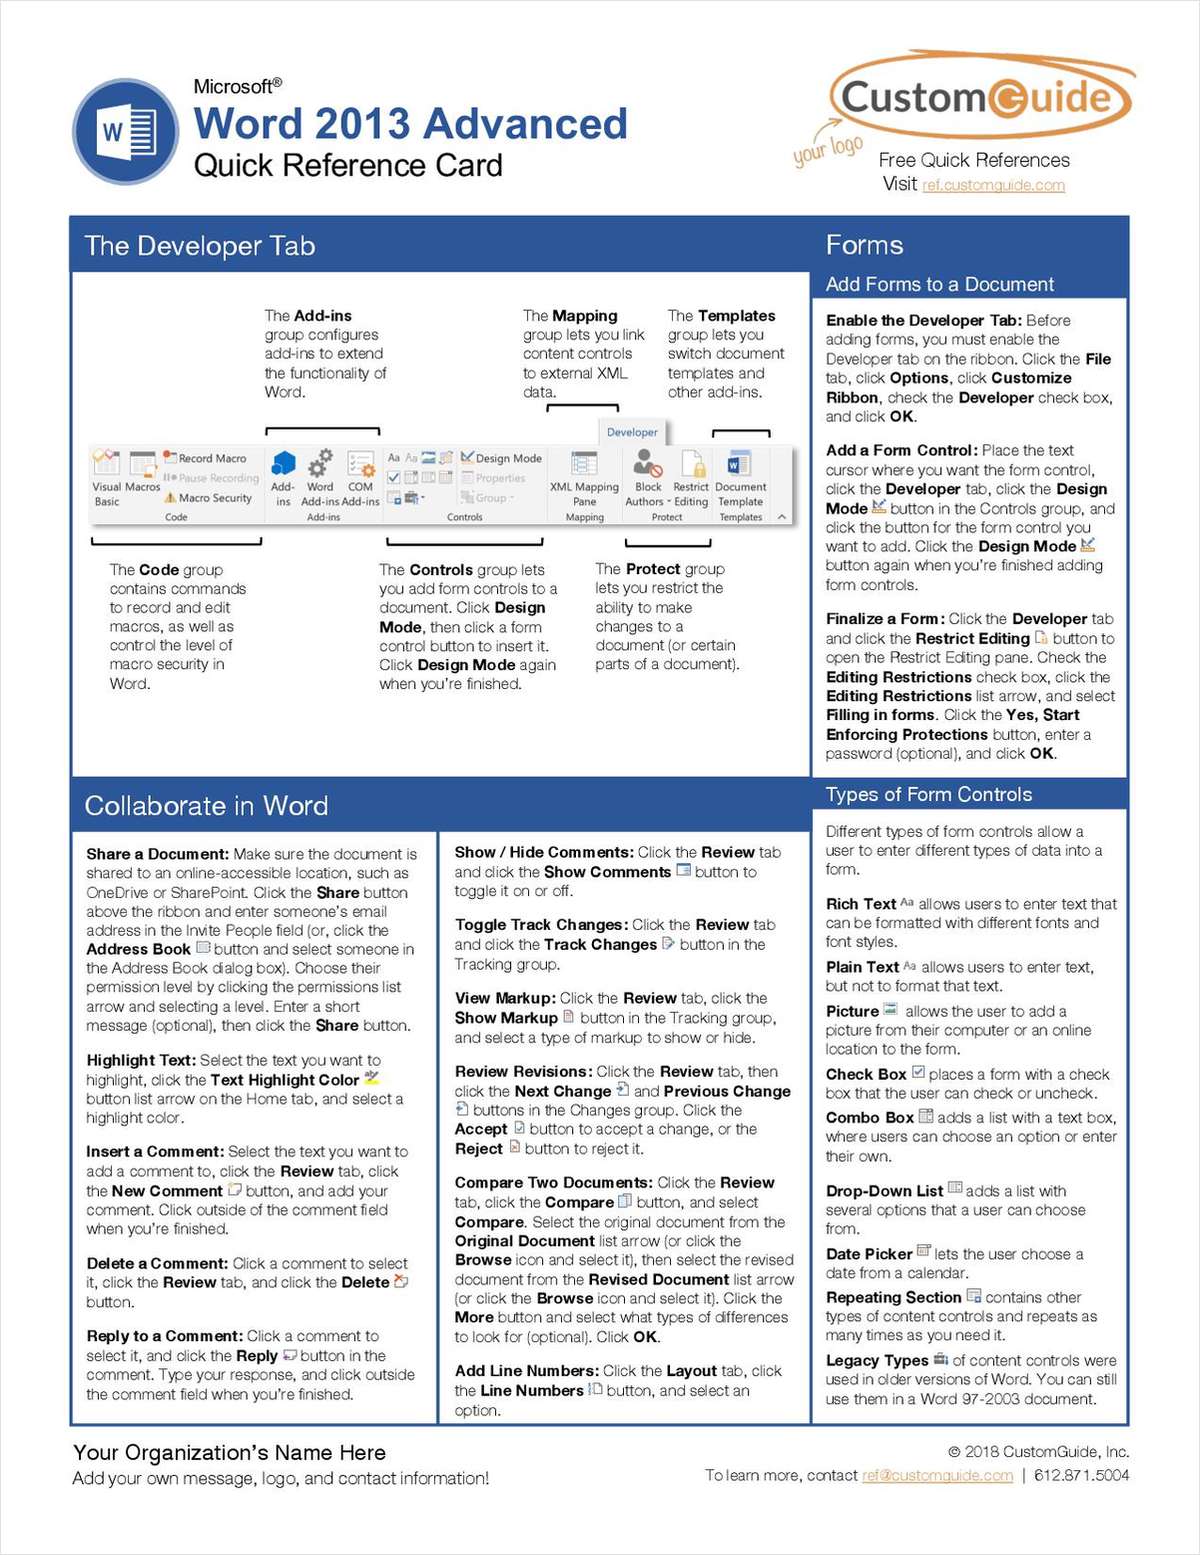 Microsoft Word 2013 Advanced Quick Reference Card Free Guide